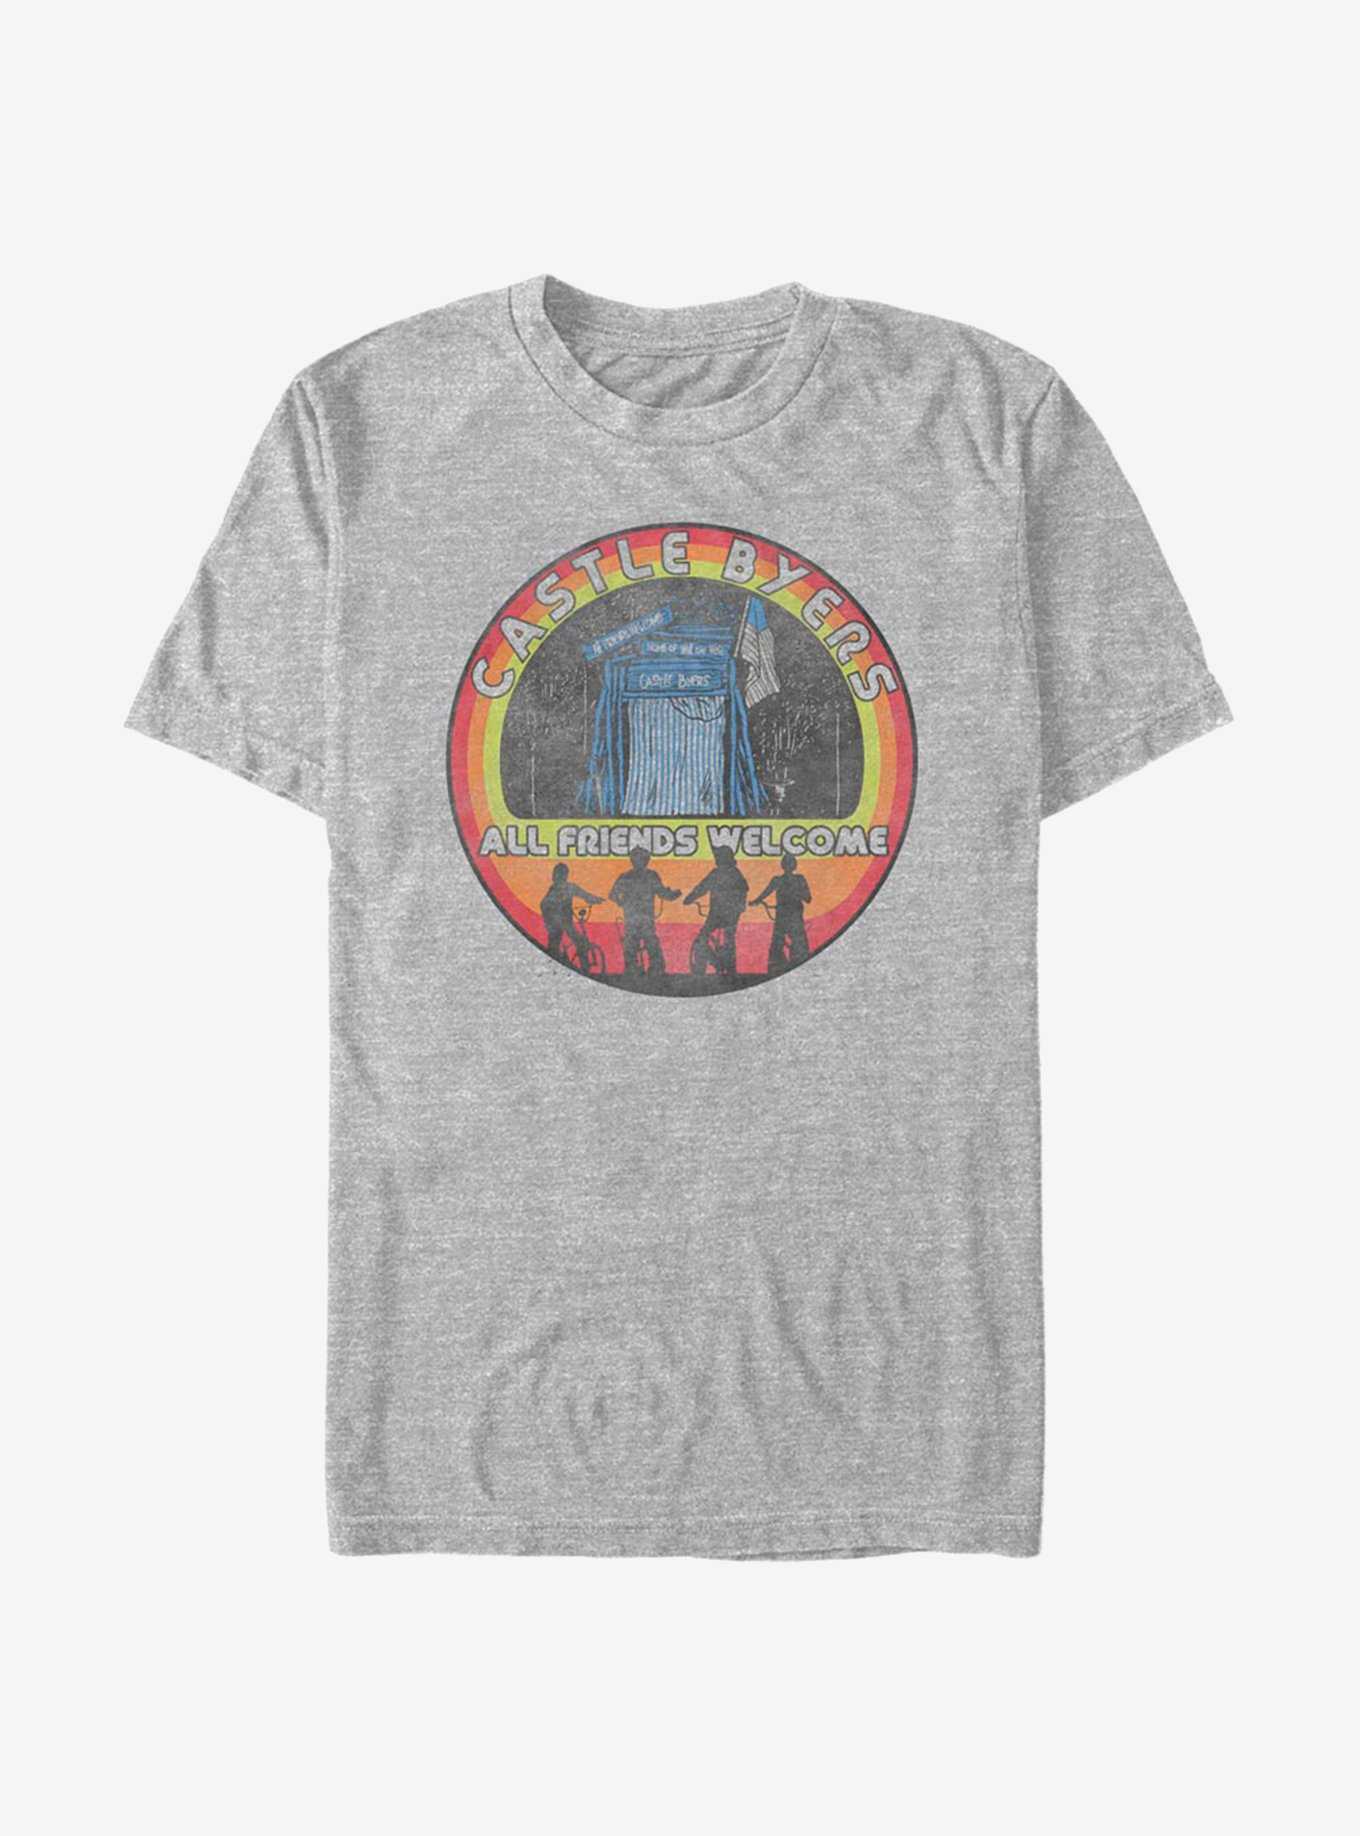 Stranger Things Castle Byers All Friends Welcome T-Shirt, , hi-res